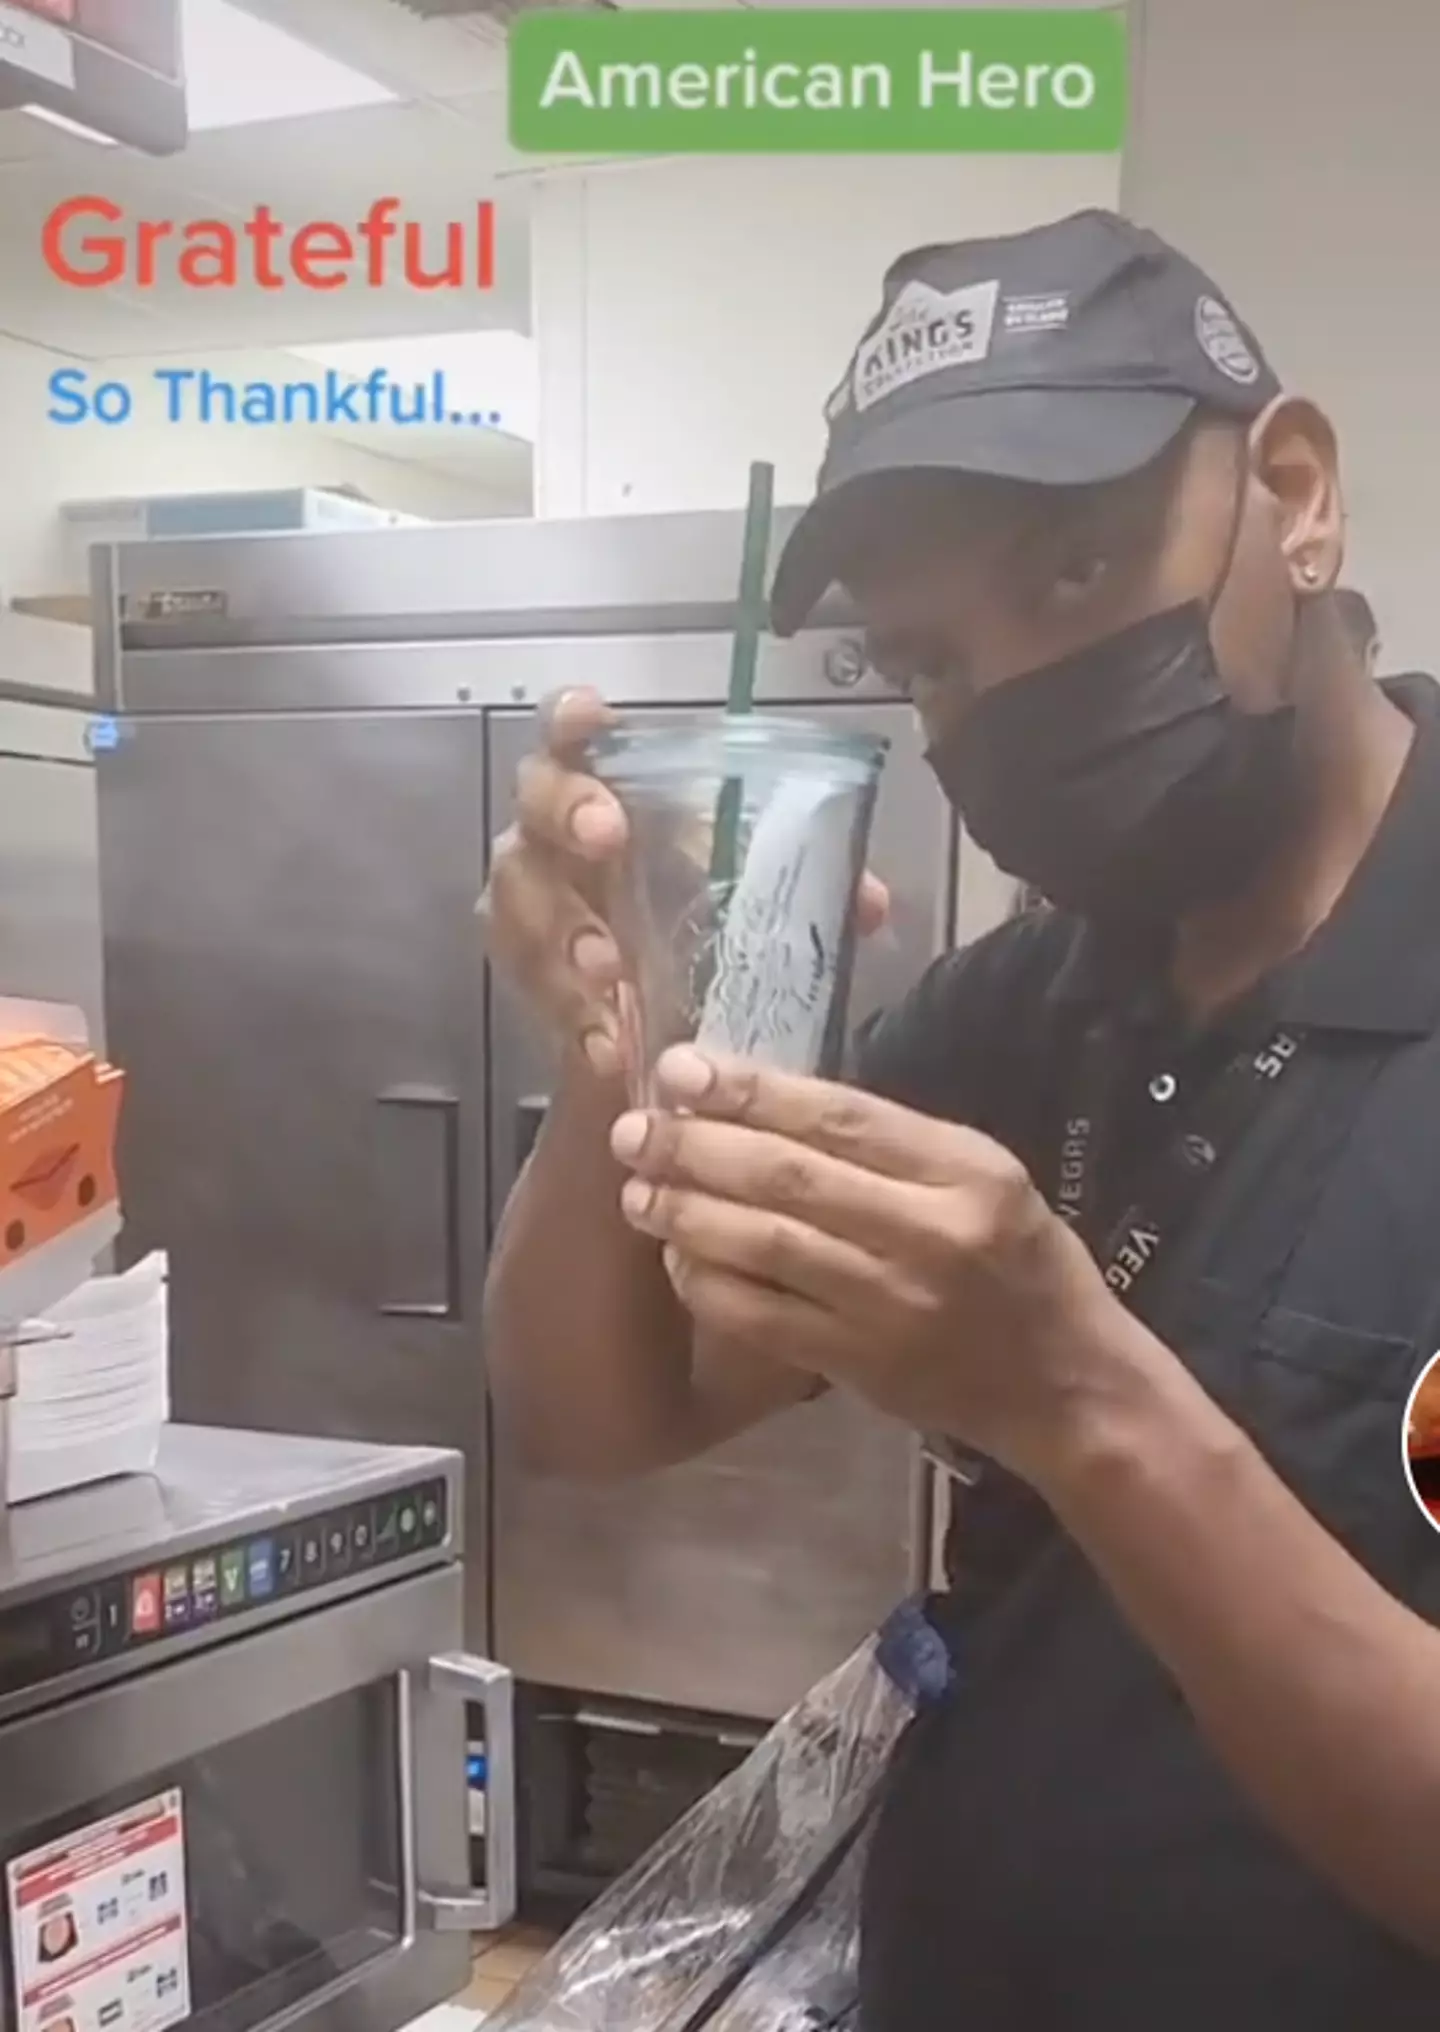 Kevin received Reese's pieces and a Starbucks cup for his service.